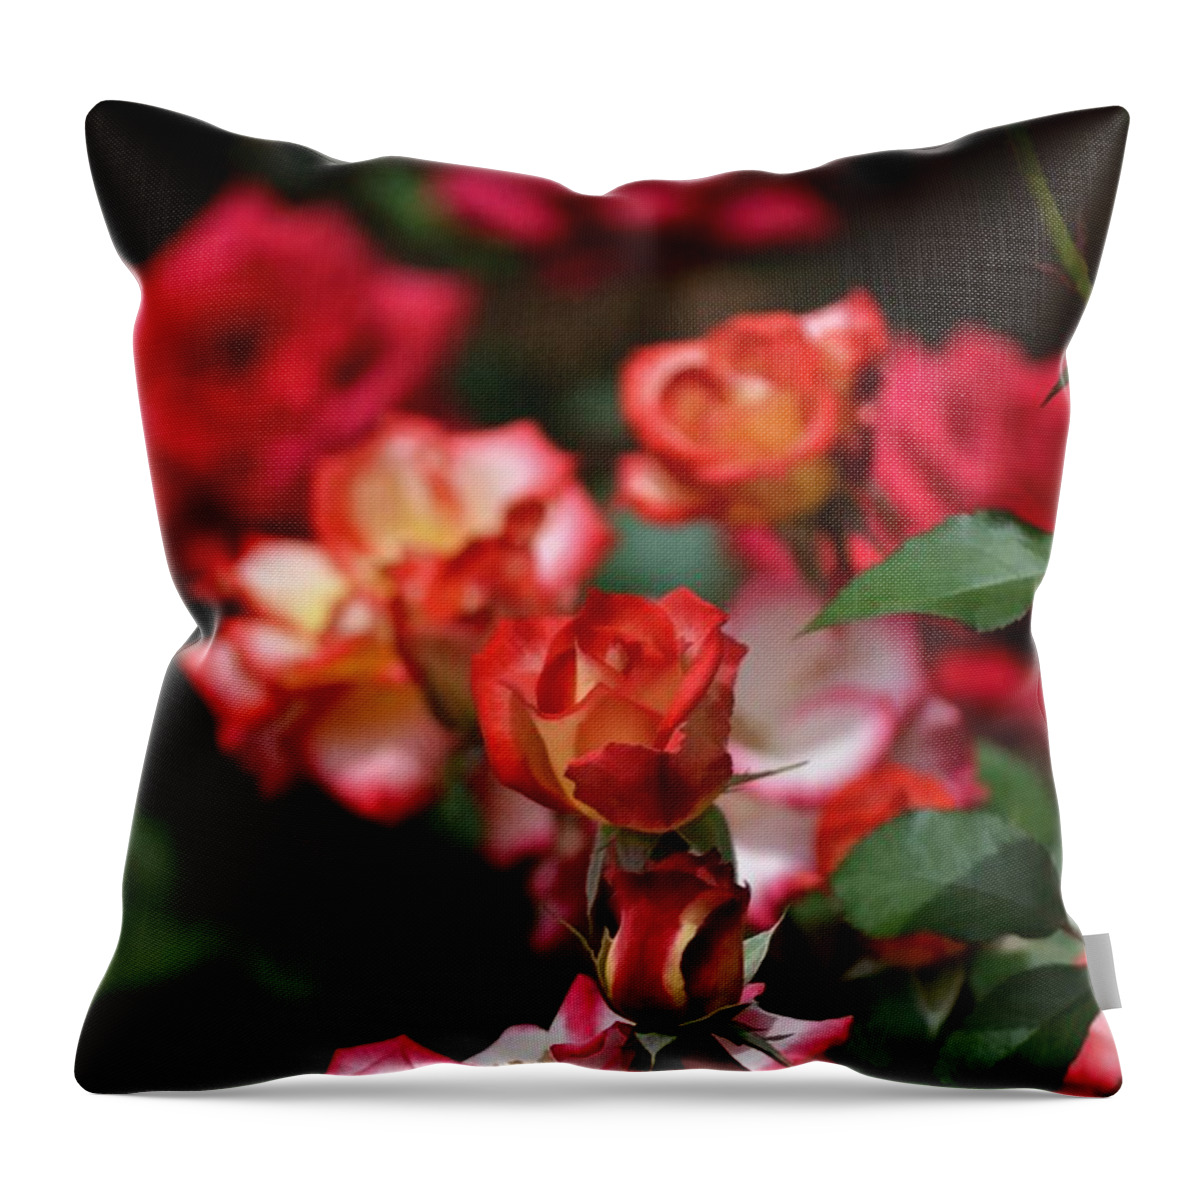 Floral Throw Pillow featuring the photograph Rose 309 by Pamela Cooper